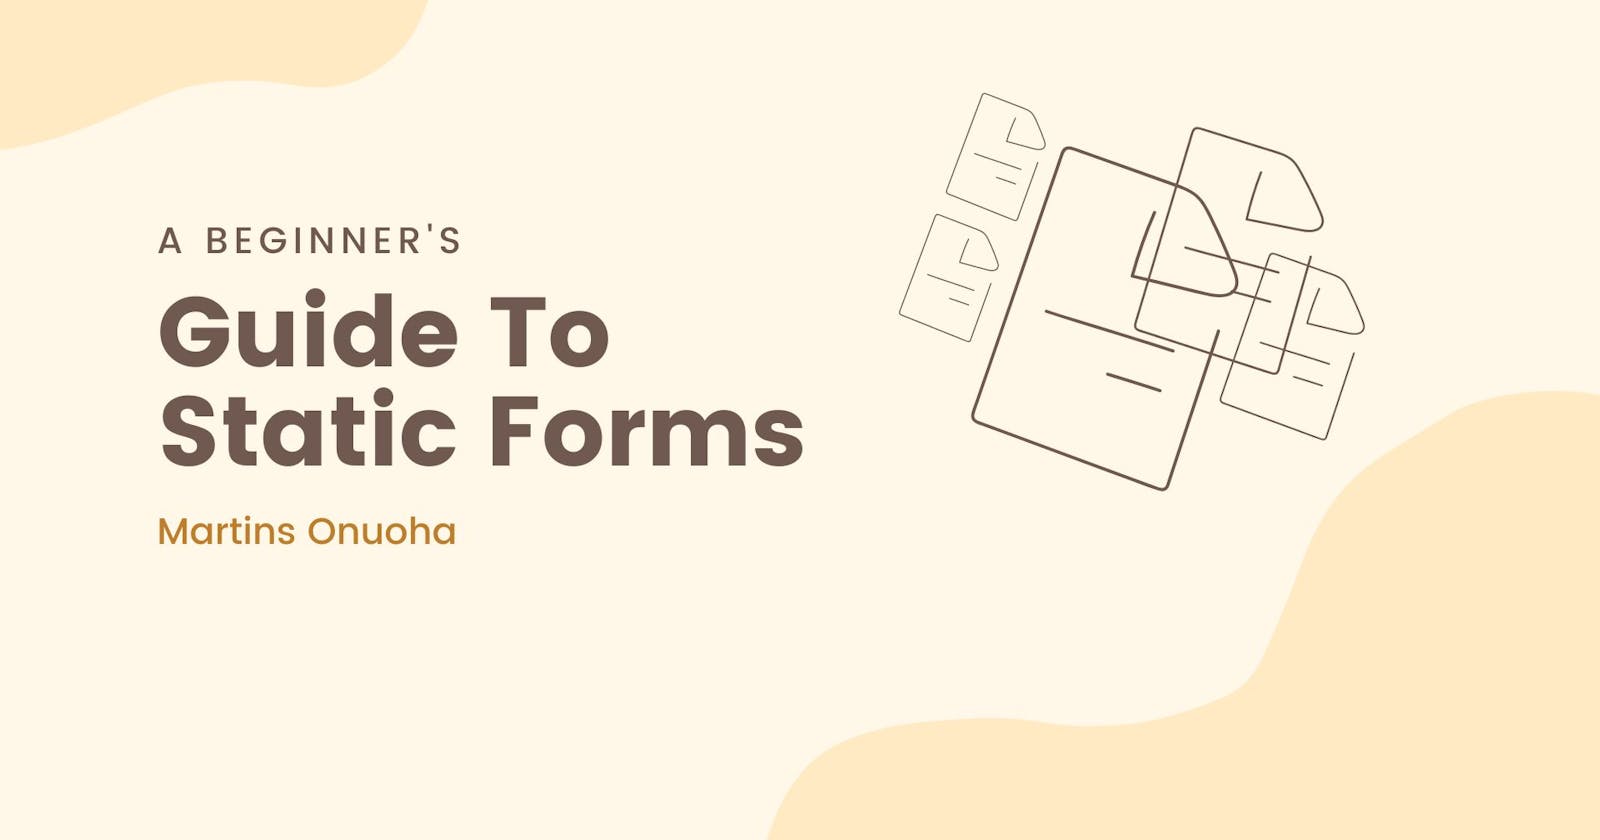 A Beginner's Guide to Static Forms